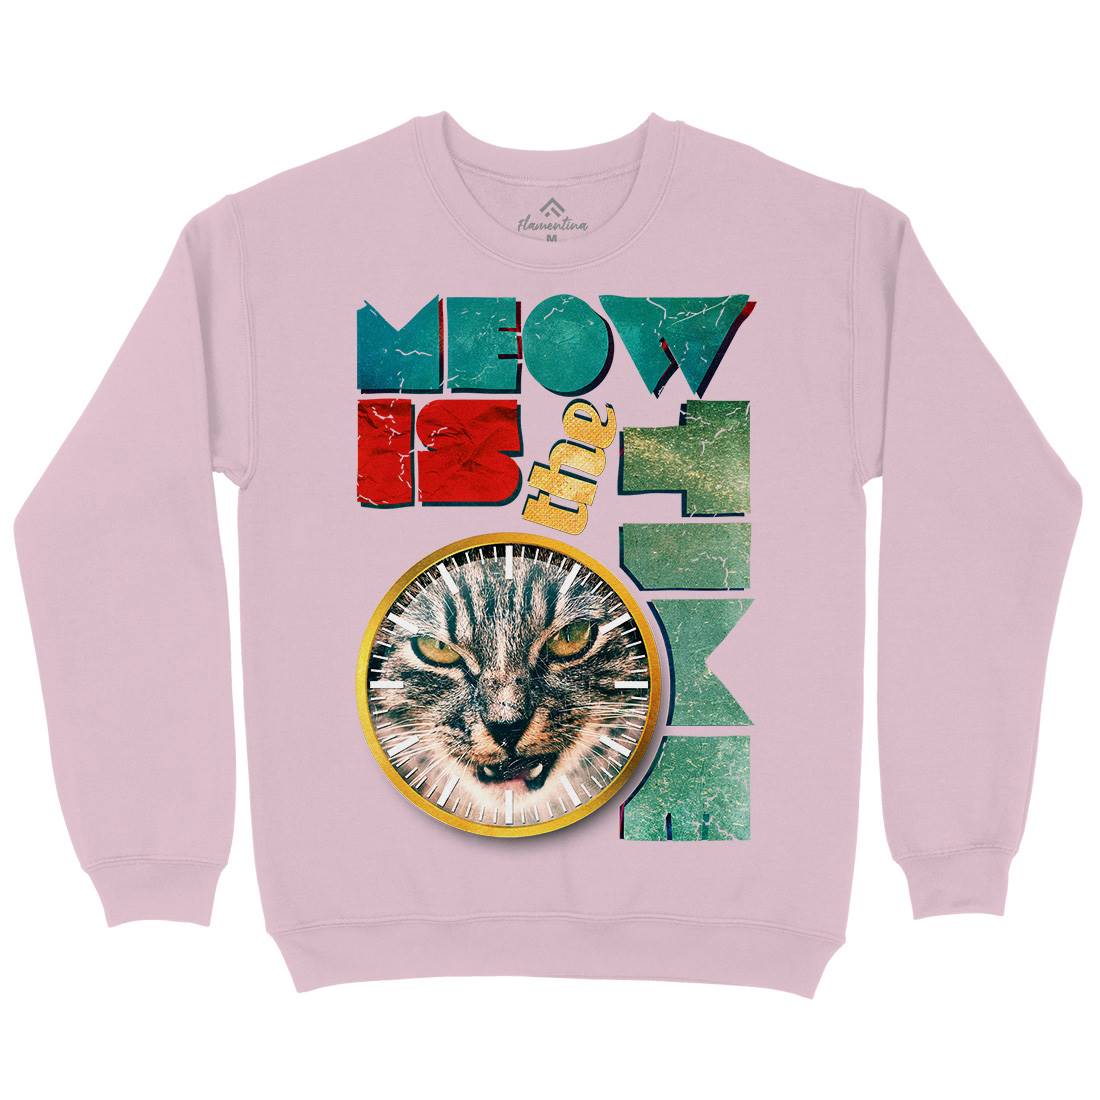 Meow Is The Time Kids Crew Neck Sweatshirt Animals A876